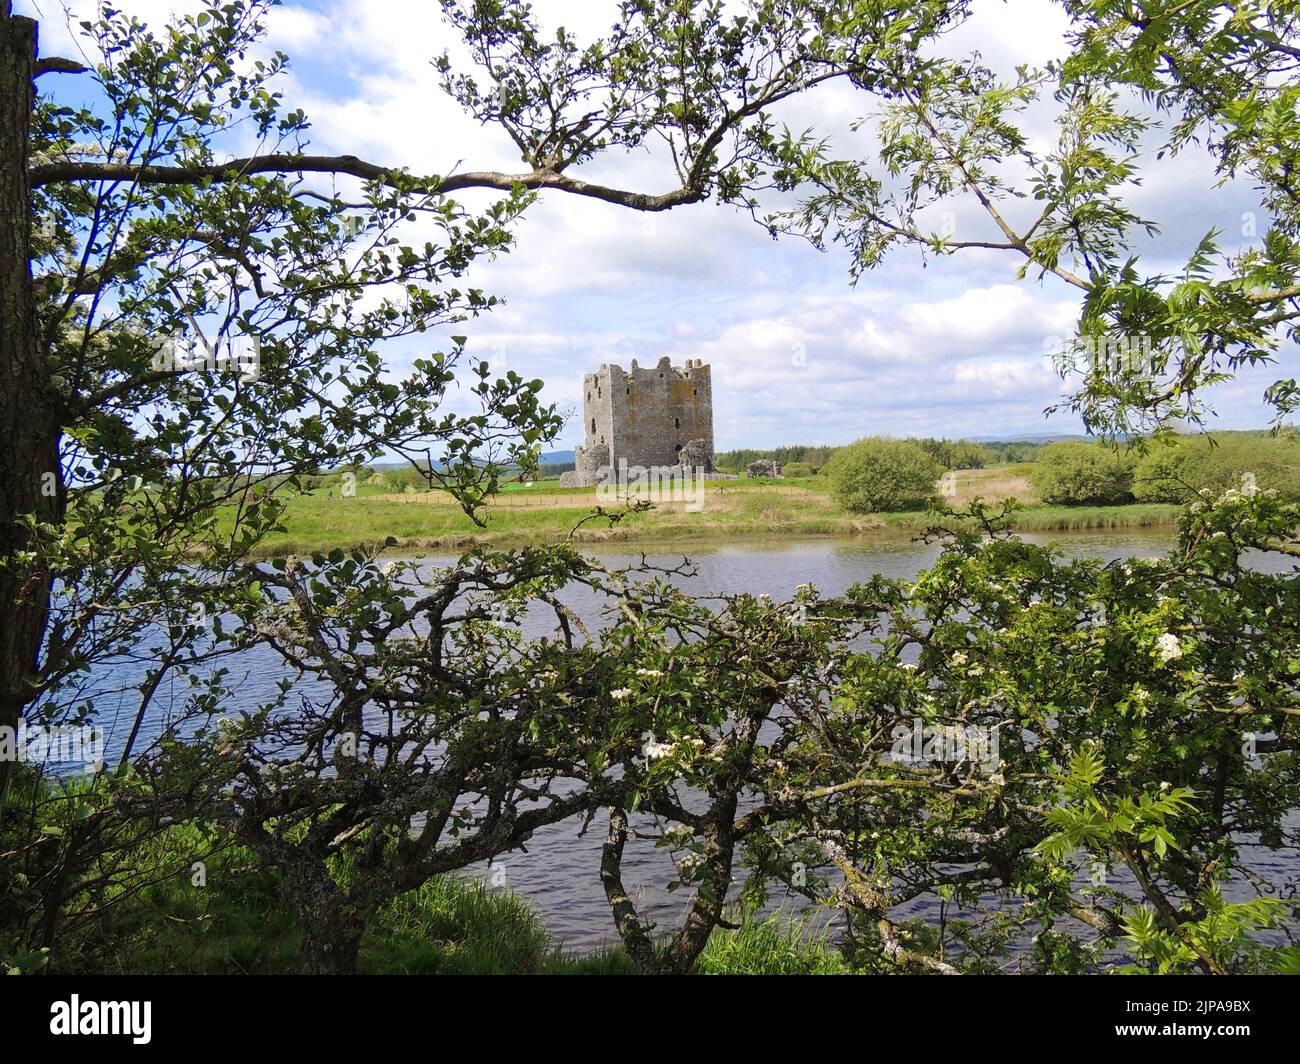 A distant view of Threave Castle on the River Dee near Castle Douglas, Dumfries and Galloway, Scotland, framed  by trees and  bushes. The castle stands on an island and is only accessible by taking  a small boat ride. It was built in the 1370's by Archibald the Grim and was a stronghold of the 'Black Douglases', Earls of Douglas and Lords of Galloway. The keep and artillery house remain standing. After a siege during  in the Bishop's War The Covenanters ordered the buildings to be dismantled, and the materials to be disposed of,  for  use by  the public. Stock Photo